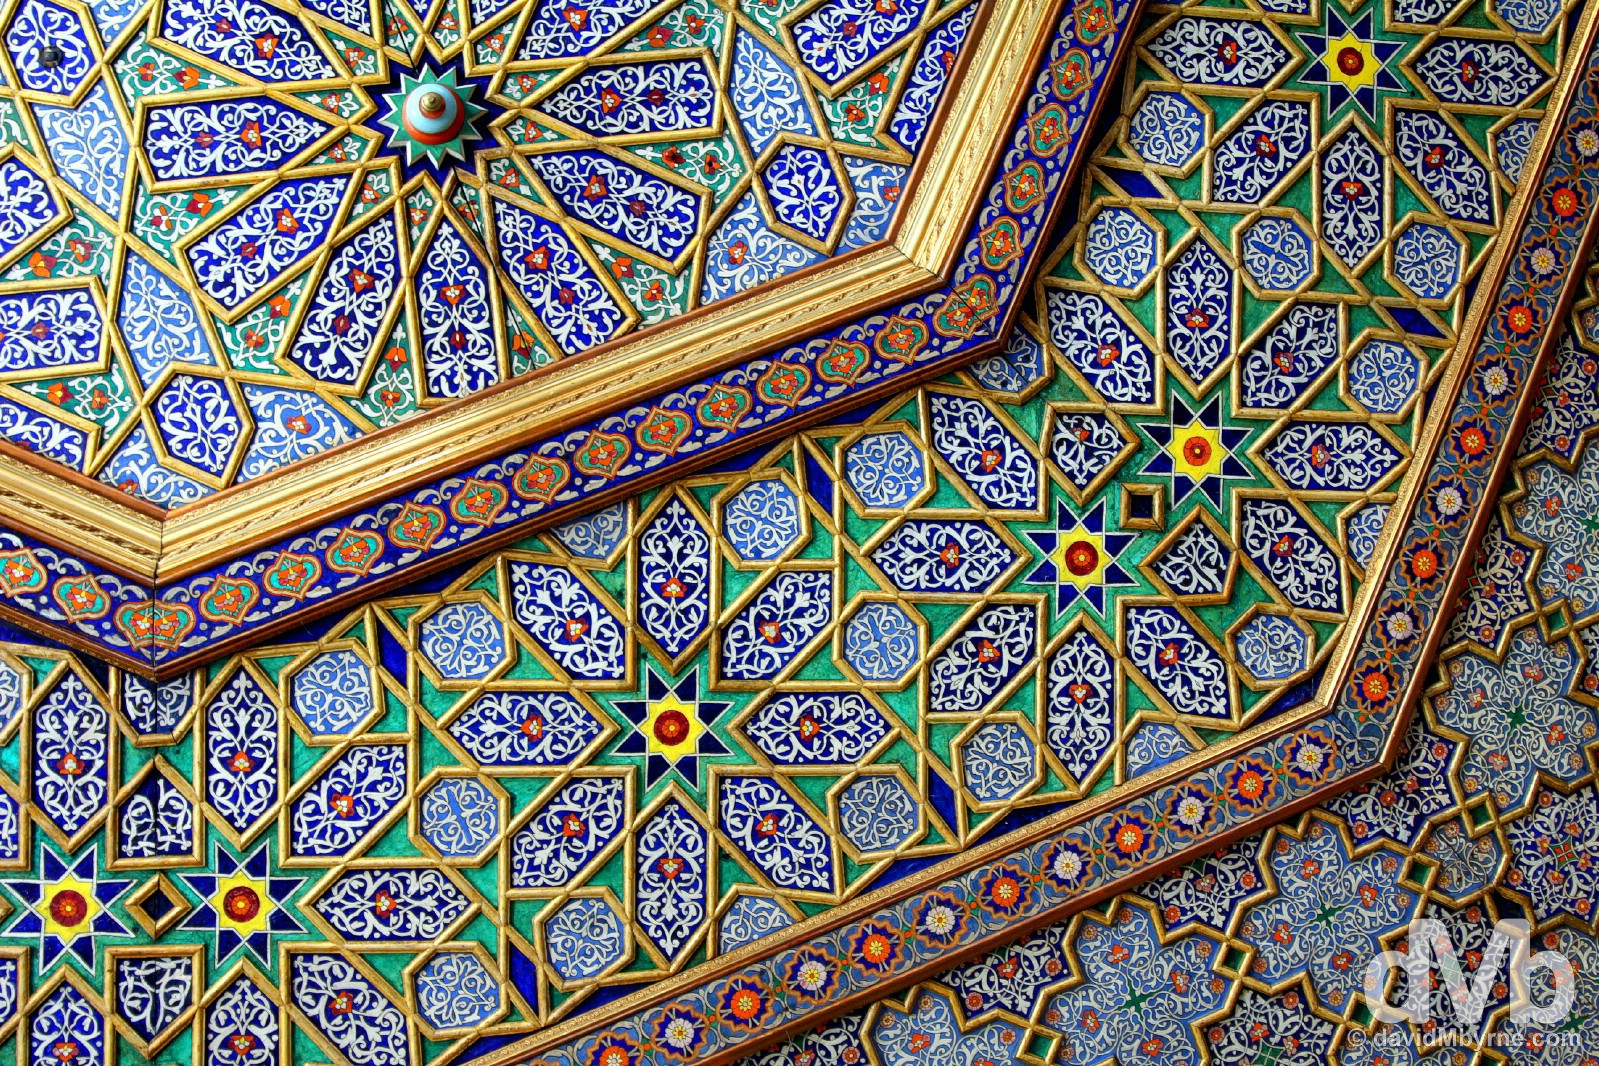 Ceiling detail in the Palace of Narallabay/Isfandiyar Palace in Khiva, Uzbekistan. March 15, 2015.